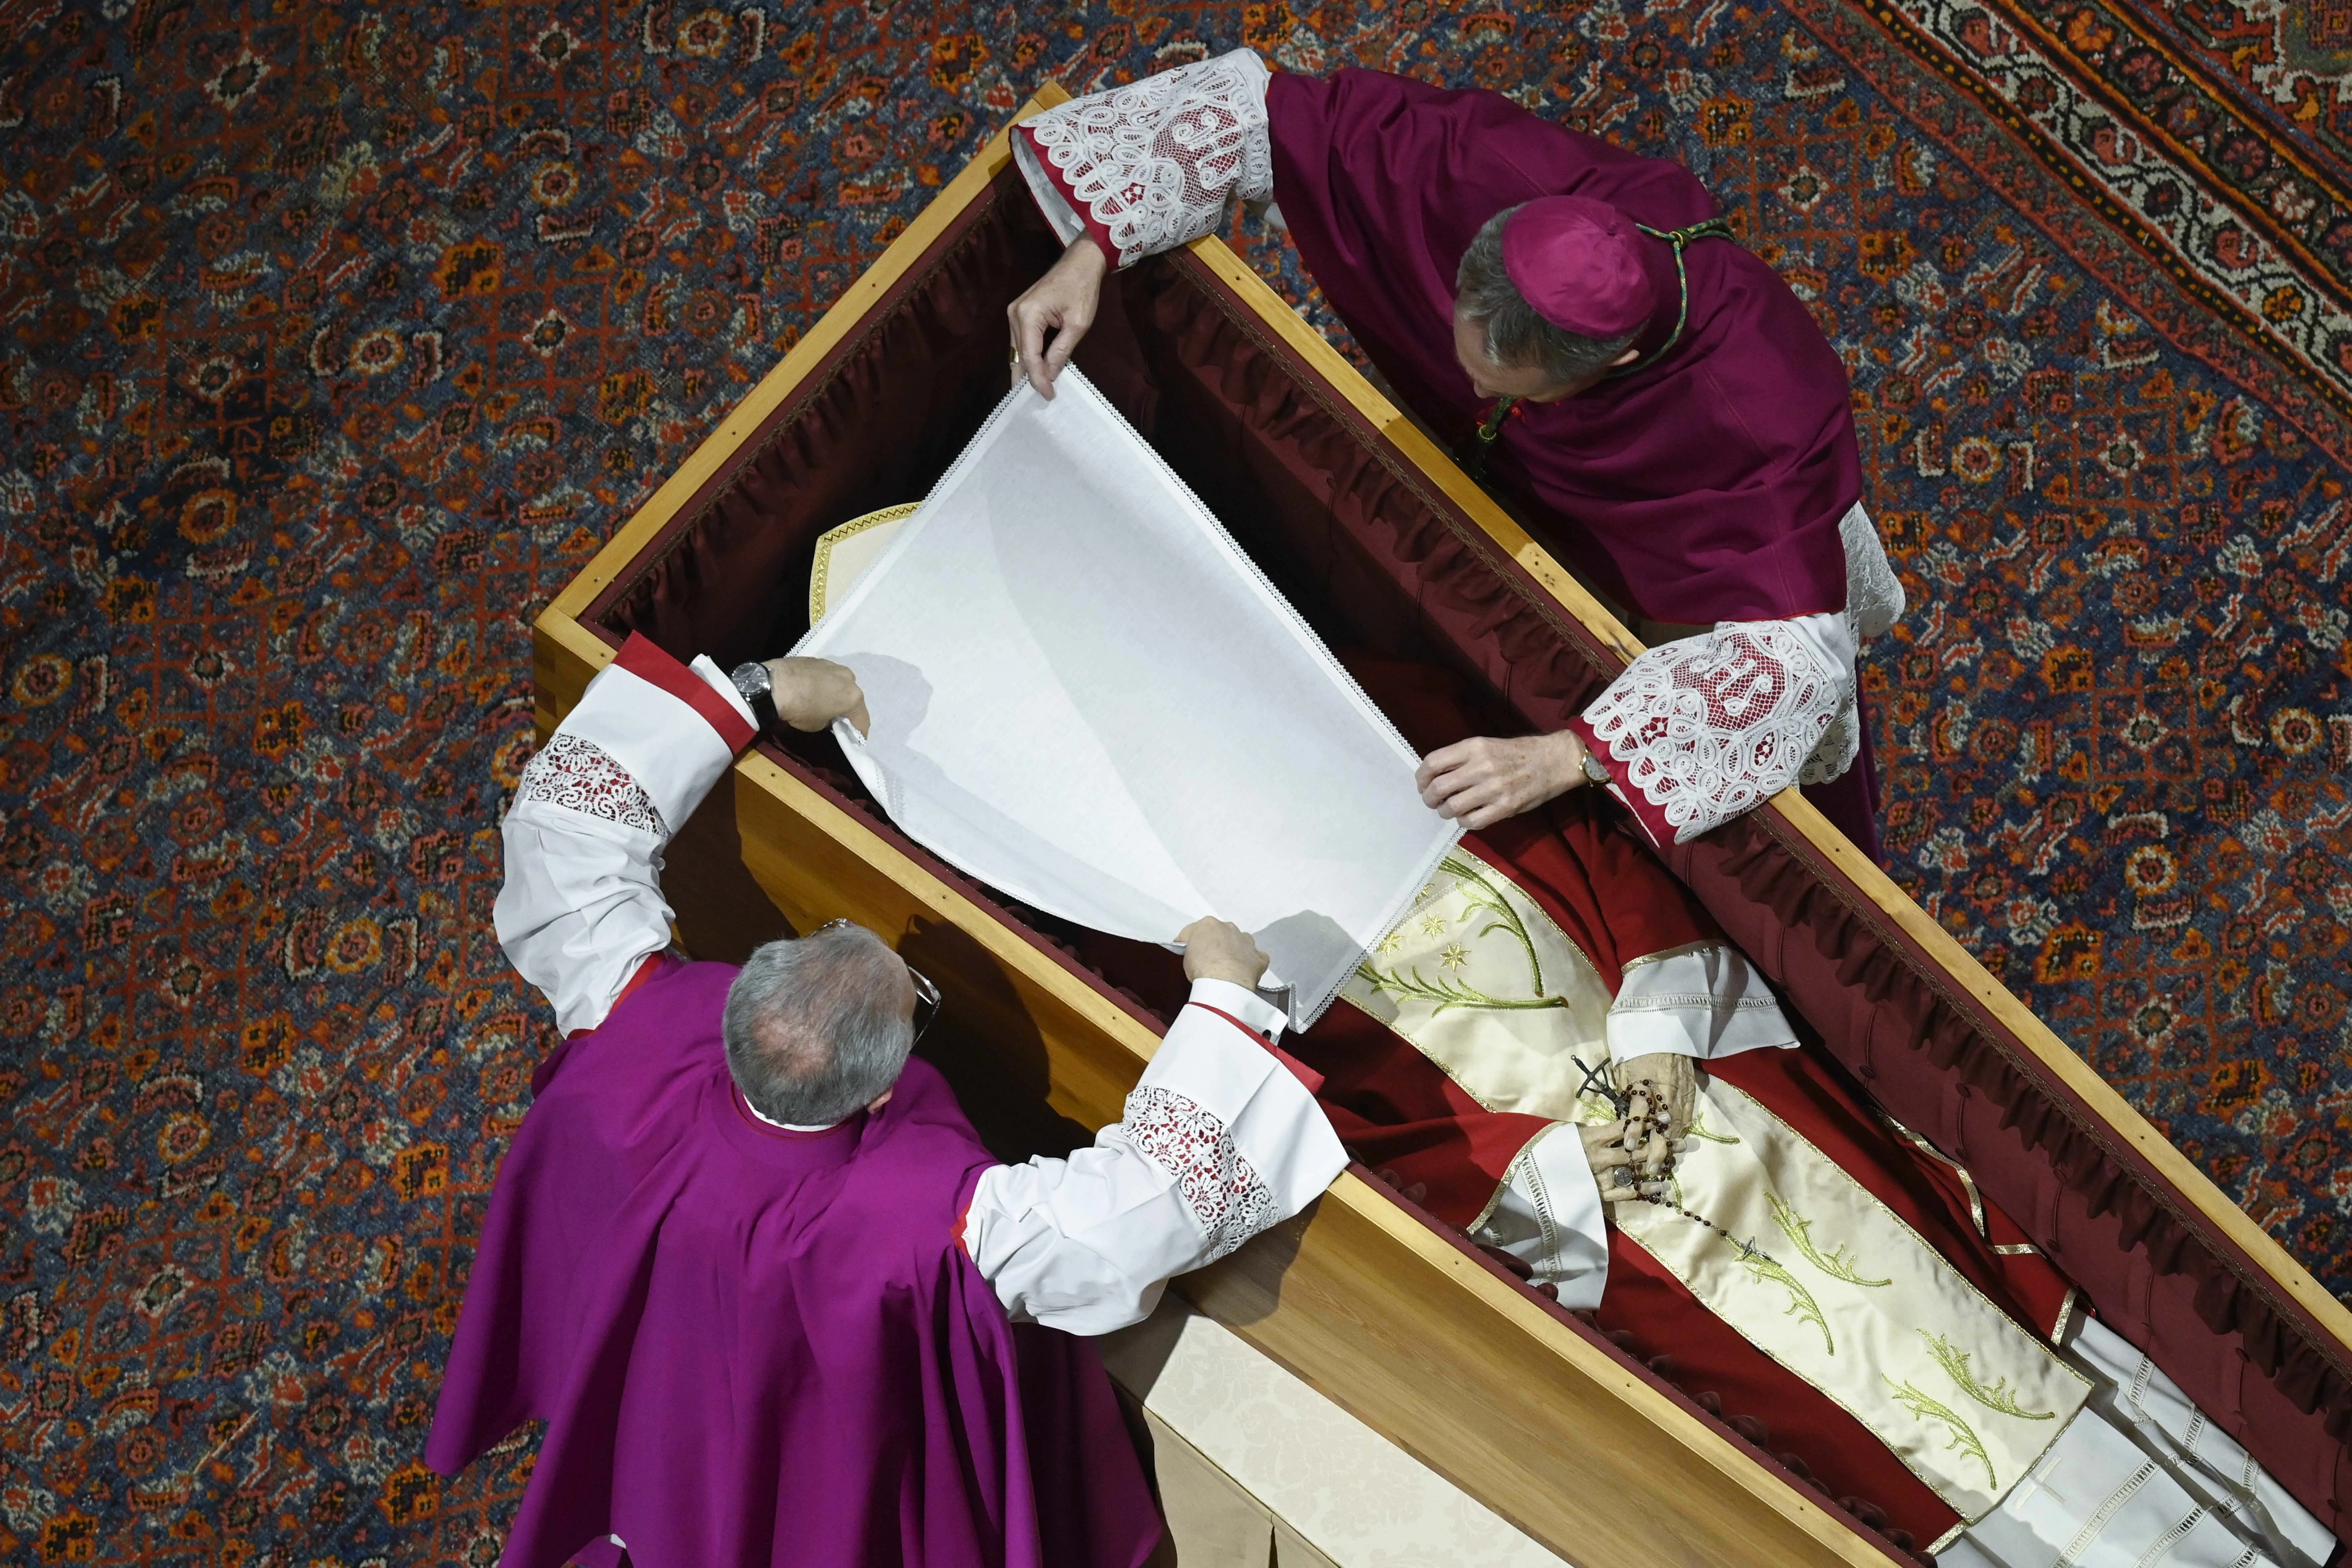 Before the wooden coffin is closed, Benedict XVI’s personal secretary Archbishop Georg Gänswein and Monsignor Diego Giovanni Ravelli, the Vatican’s lead master of ceremonies for papal liturgies, place a white veil over the late pope’s face. The action on Jan. 4, 2023, is part of the funeral rites for popes.?w=200&h=150